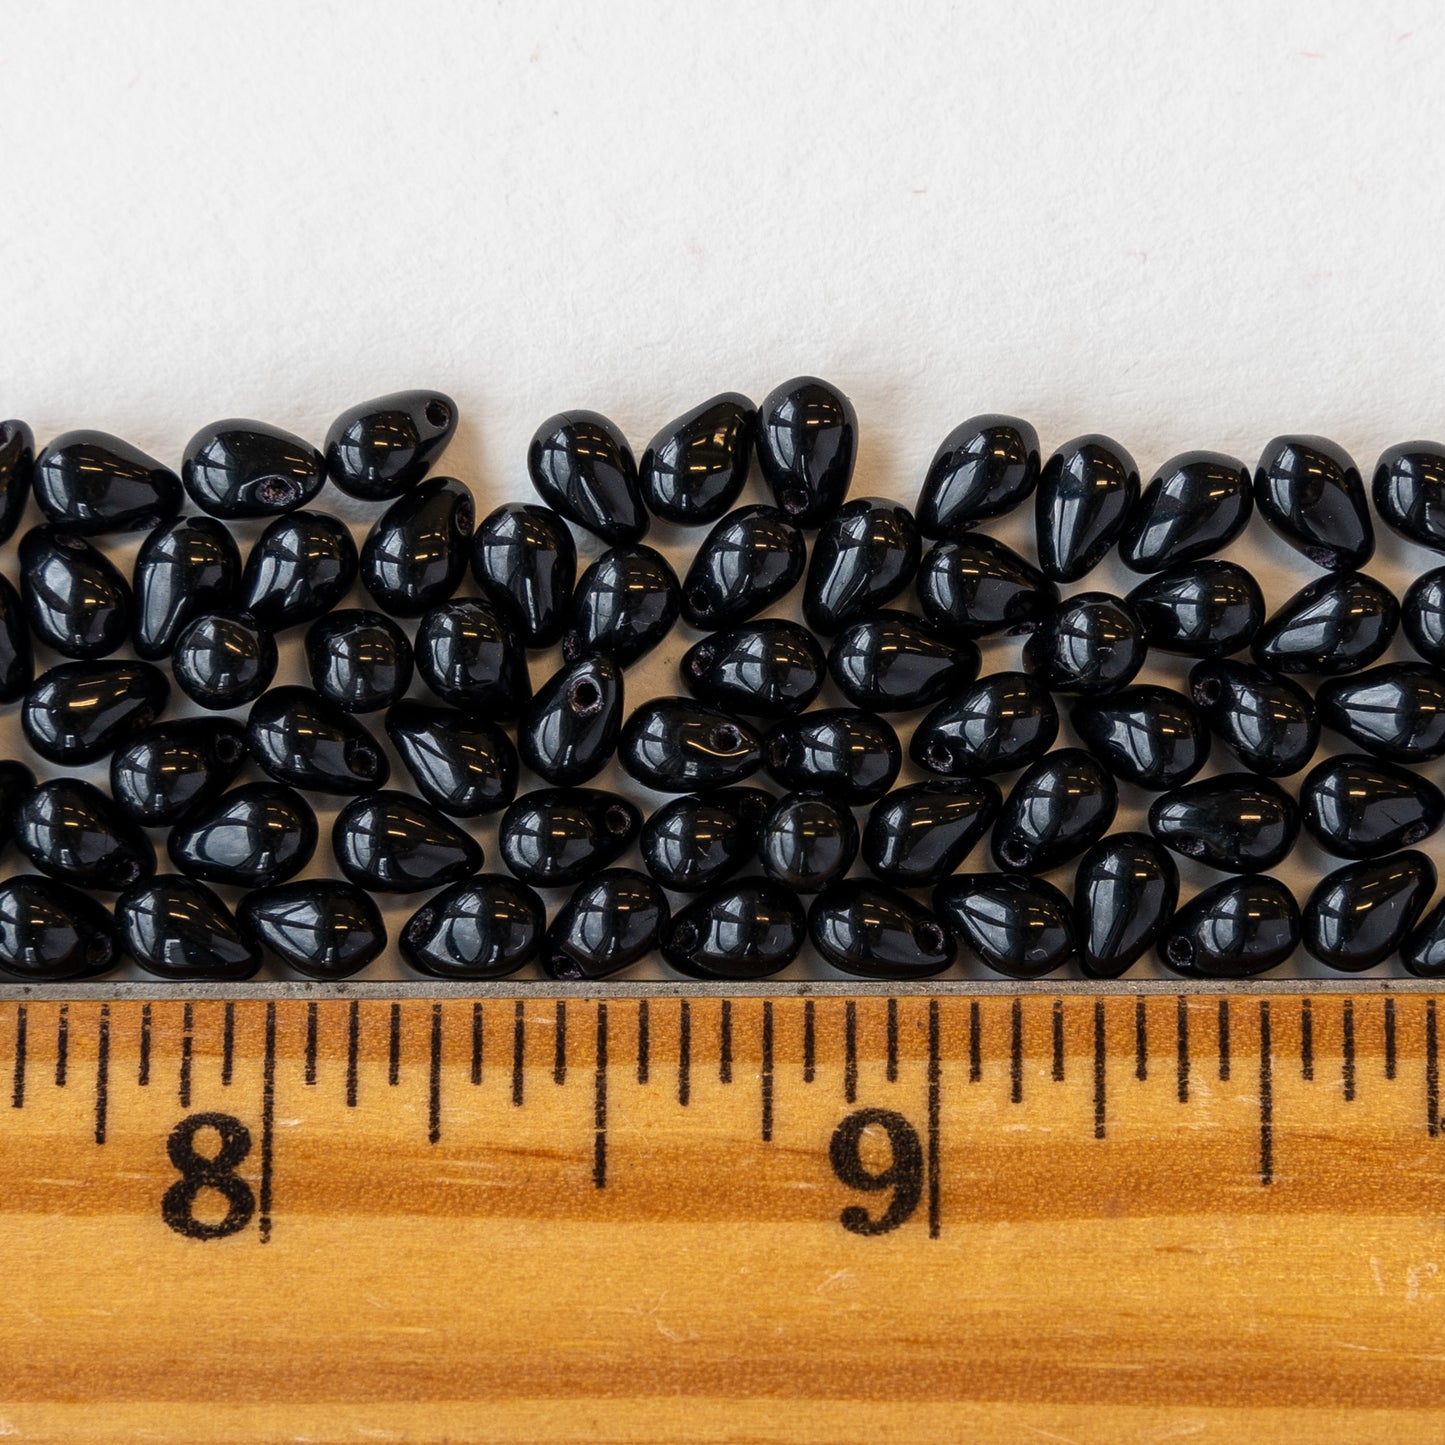 Load image into Gallery viewer, 4x6mm Glass Teardrop Beads - Black - 100 Beads
